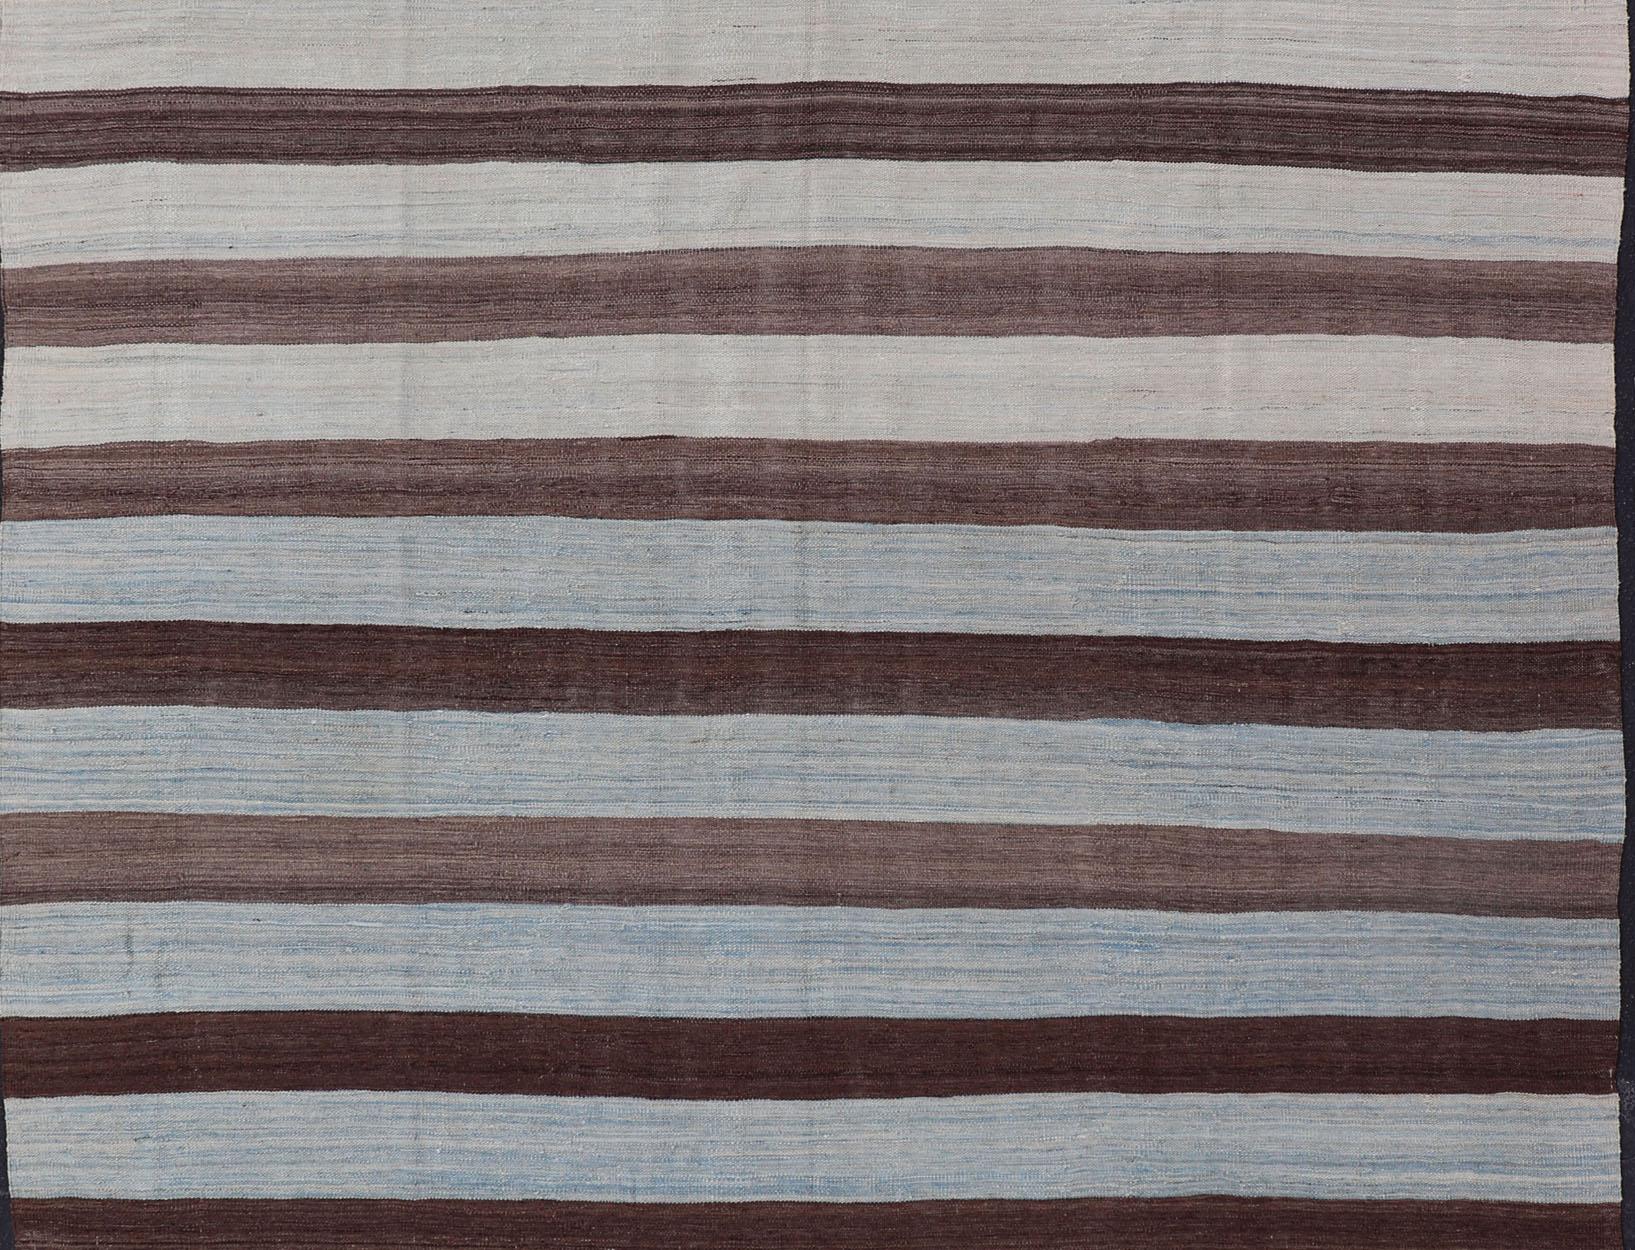 Flat-weave Kilim rug with stripes with modern design in shades of blue's, brown's Keivan Woven Arts / rug AFG-155, country of origin / type: Afghanistan / Kilim

This beautiful Kilim piece features a Classic stripe design that evokes casual and